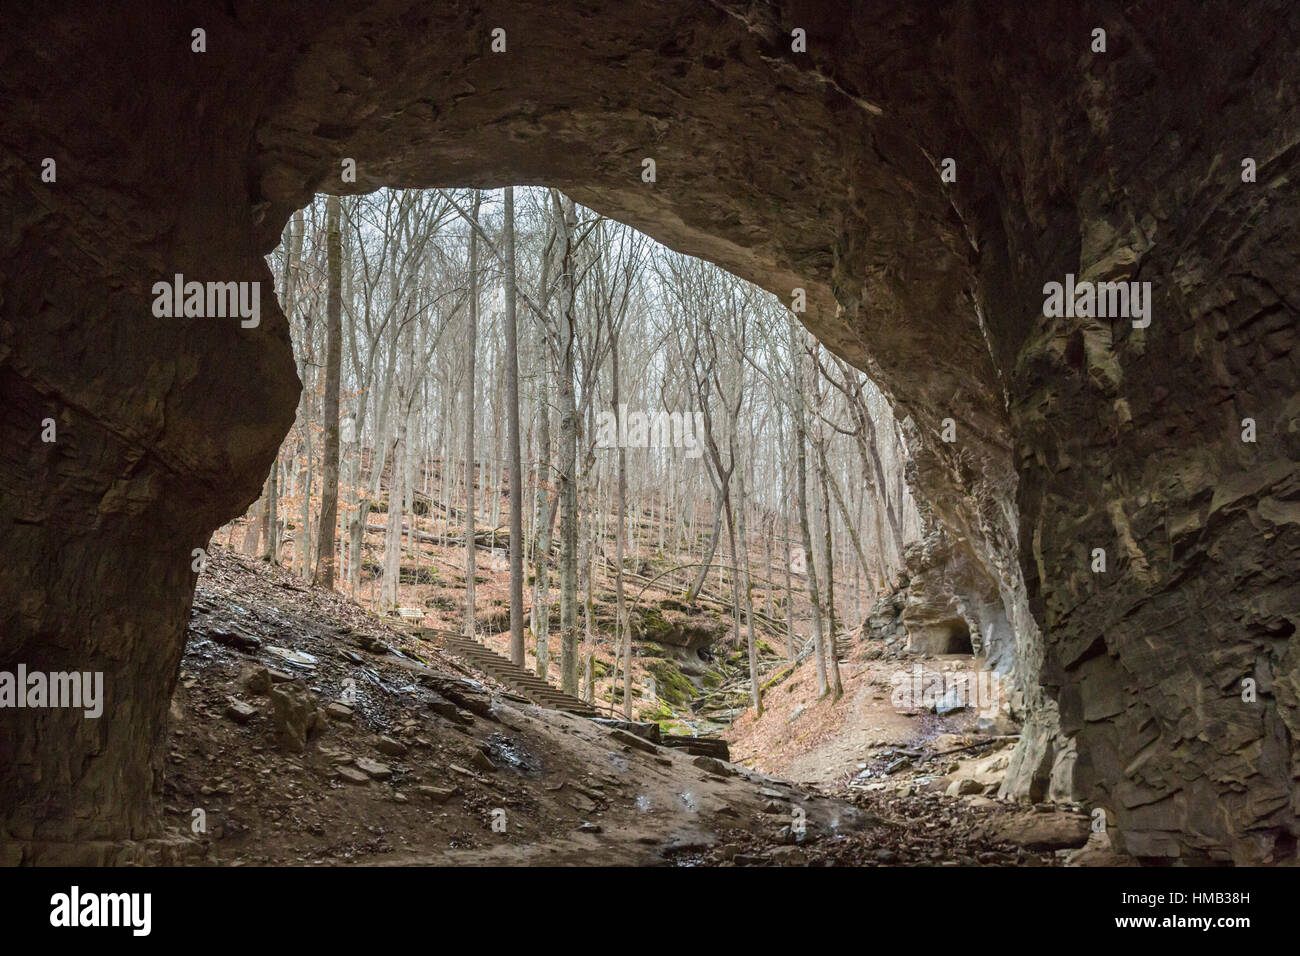 Olive Hill, Kentucky - Smoky Bridge, a natural stone bridge, at Carter Caves State Resort Park. The park has more than 20 caves and natural bridges. Stock Photo